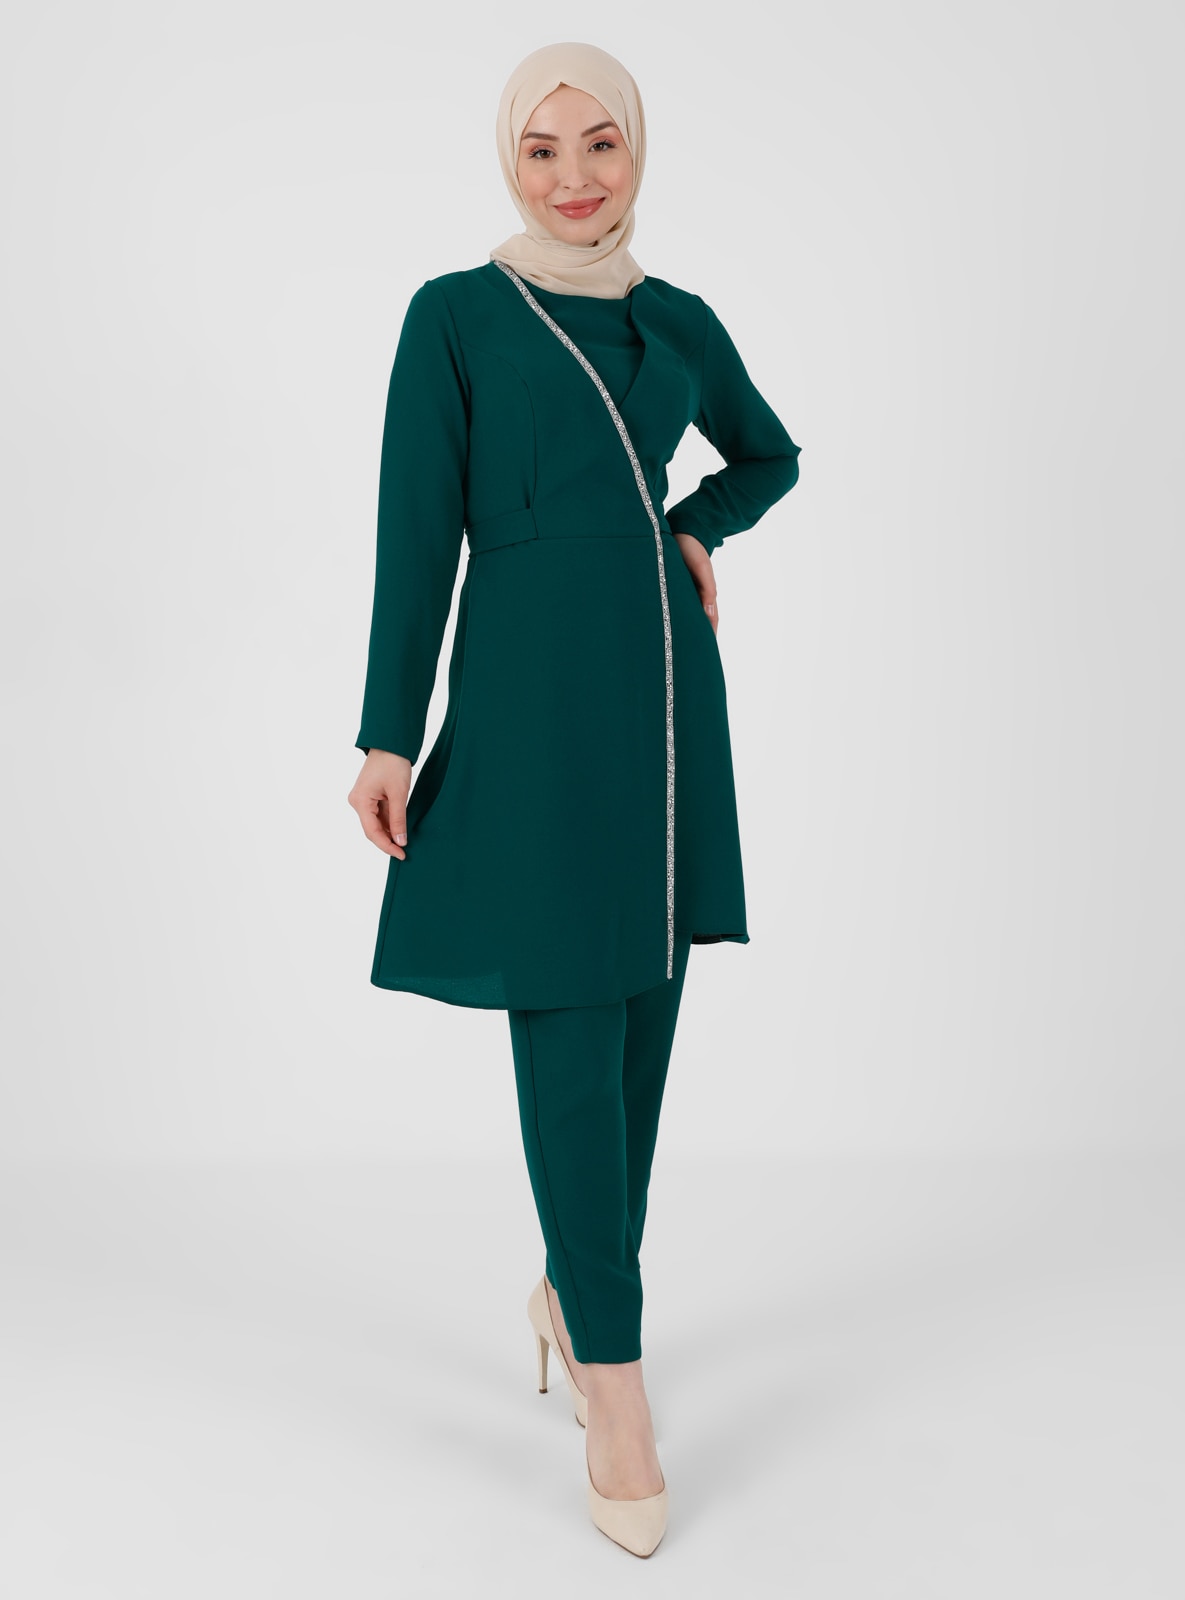 Fully Lined - Emerald - Crew neck - Evening Suit